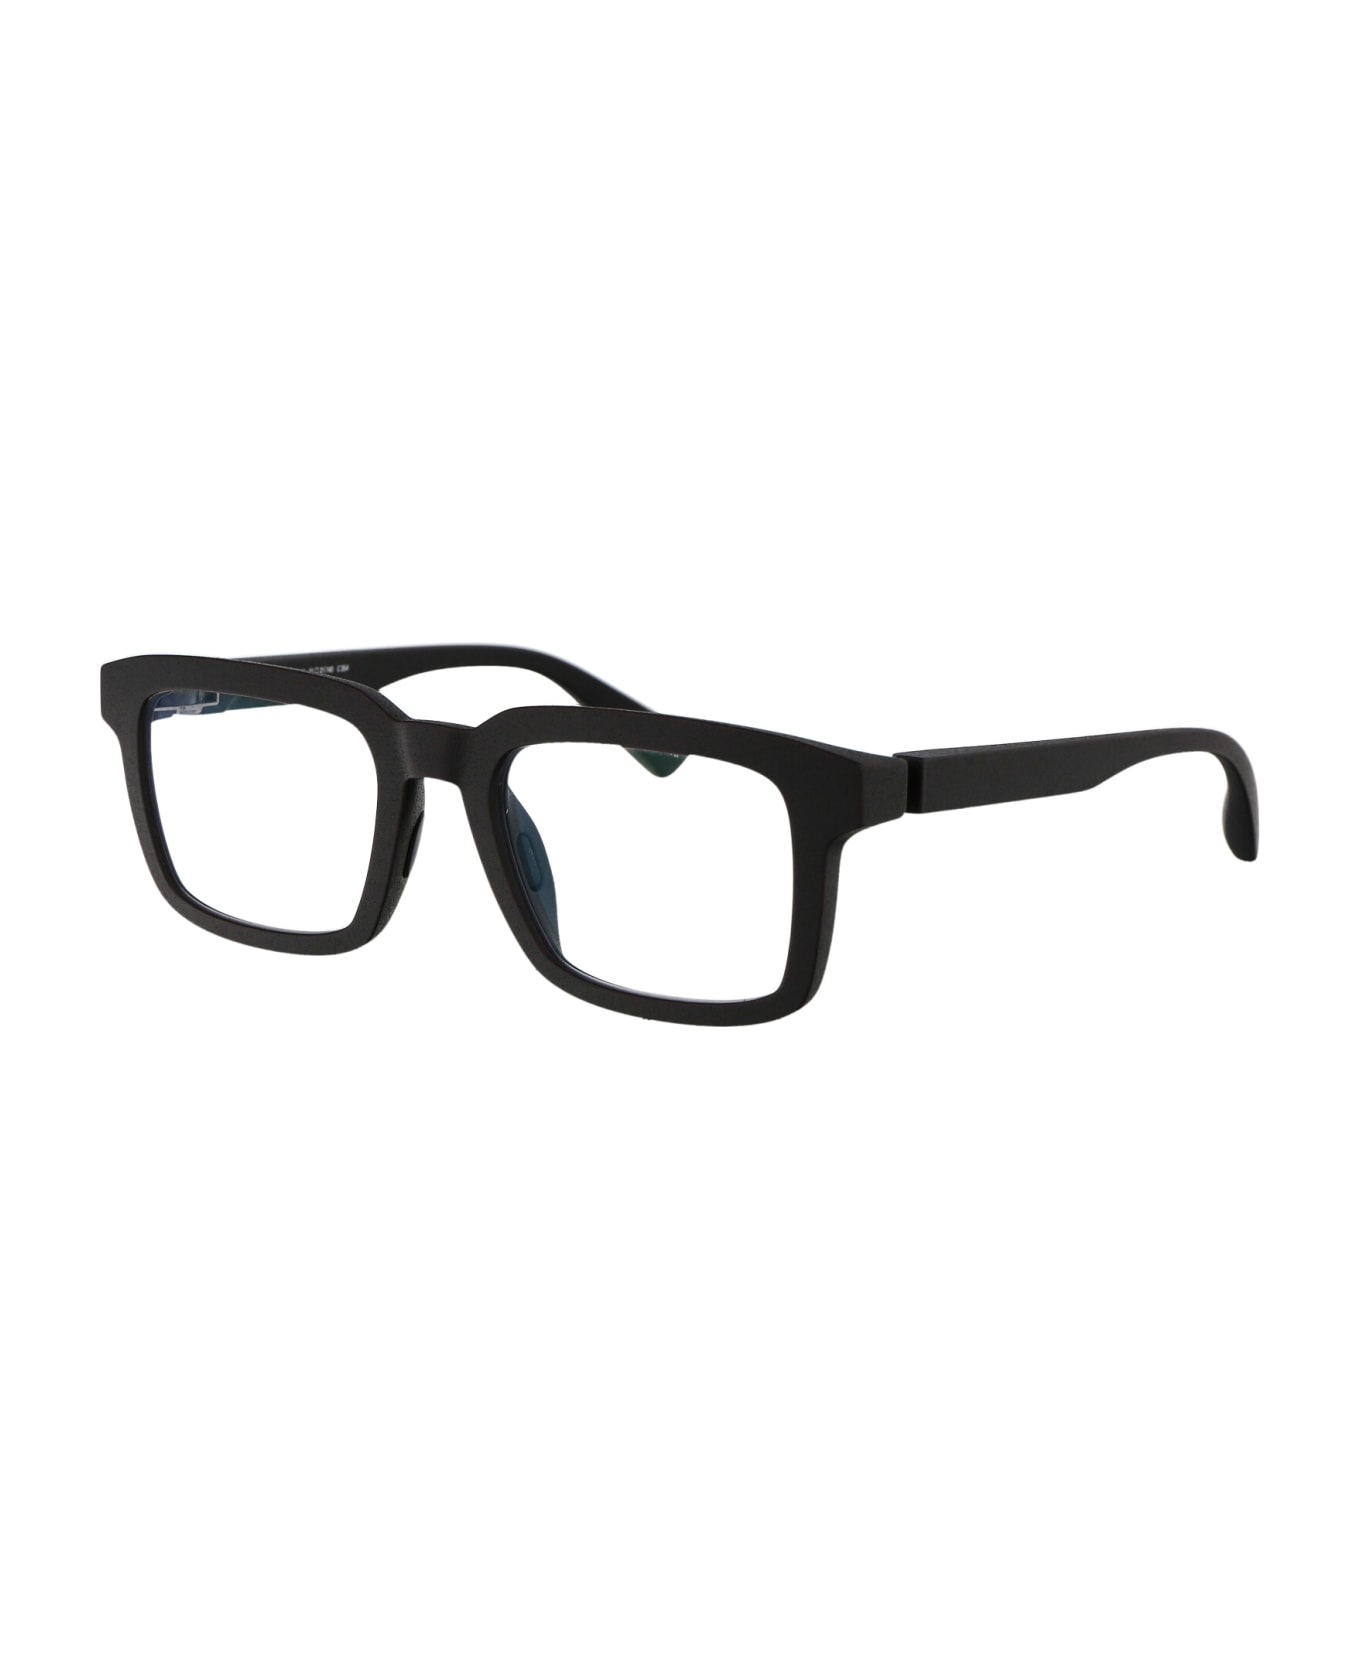 Mykita Canna Glasses - 354 MD1-Pitch Black Clear